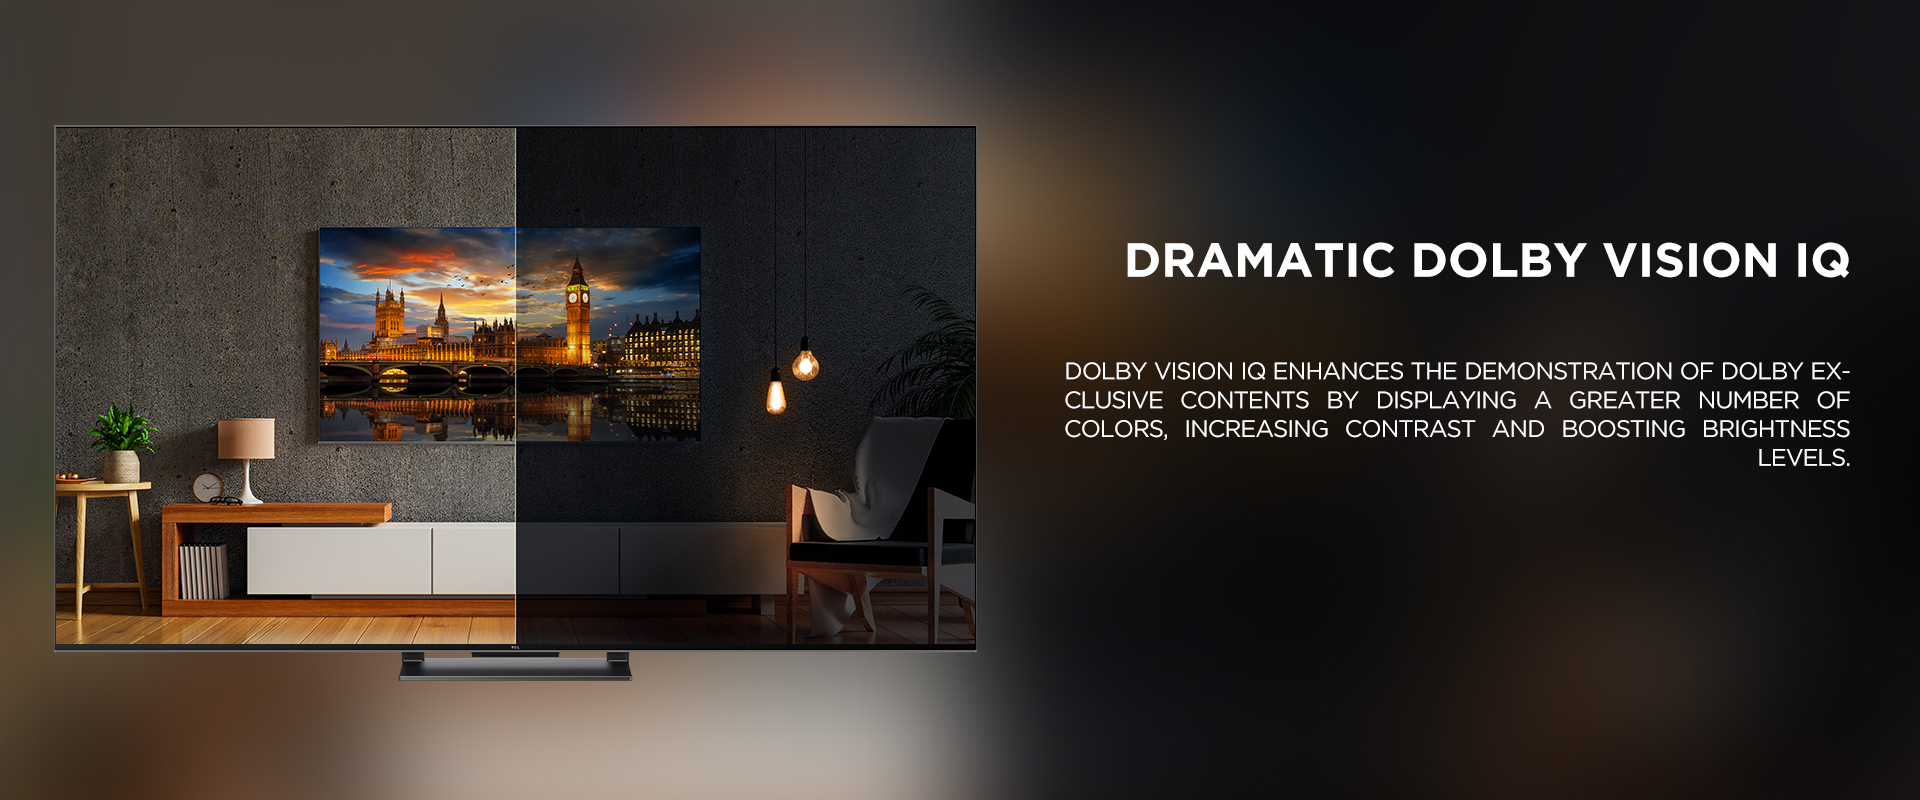 Dramatic Dolby Vision IQ - Dolby Vision IQ enhances the demonstration of Dolby exclusive contents by displaying a greater number of colors, increasing contrast and boosting brightness levels.